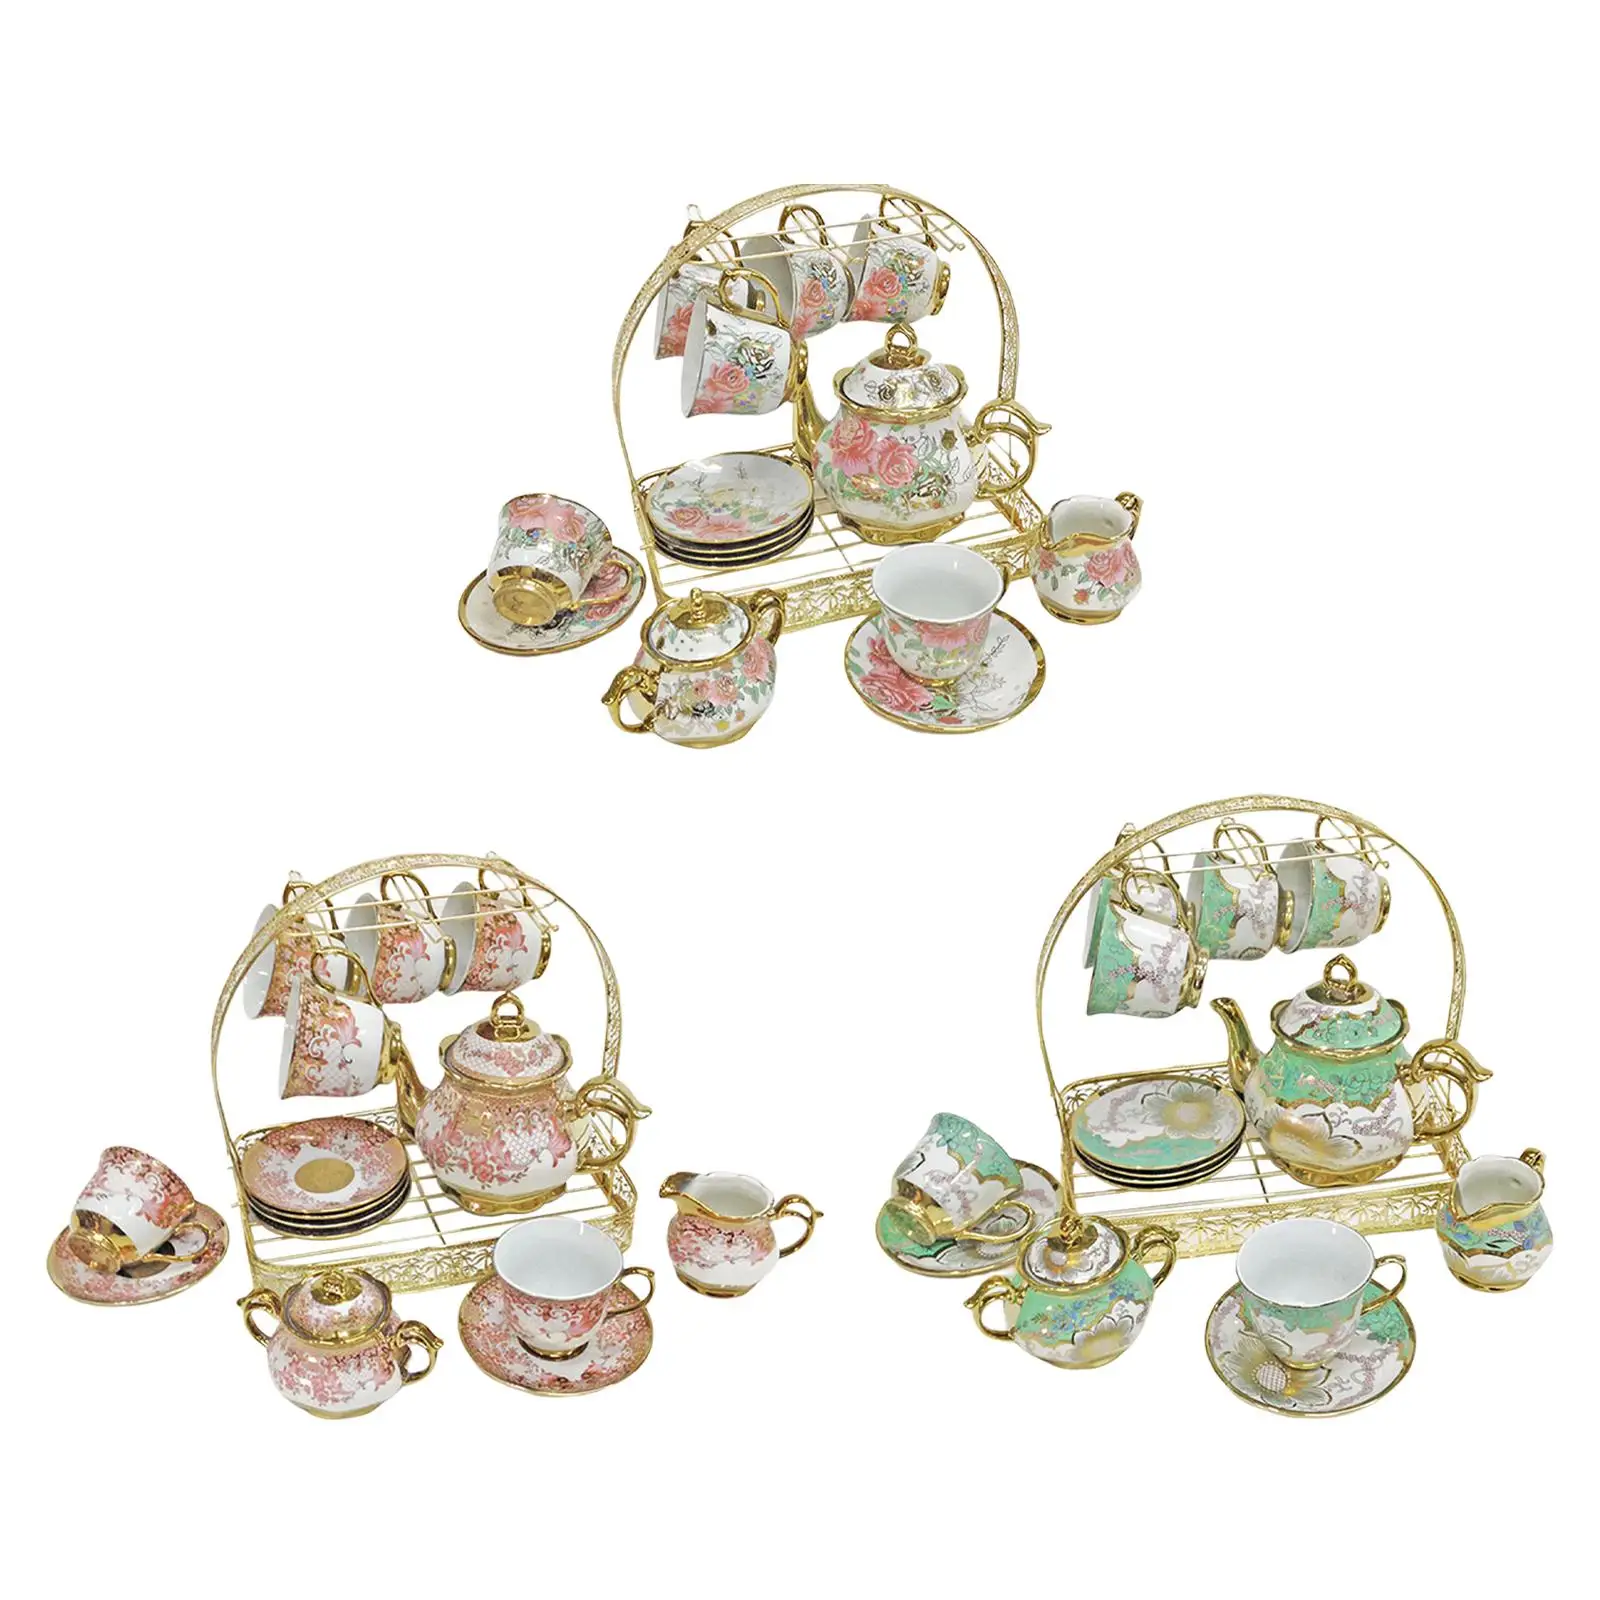 Ceramic Cups and Saucers Set with Stand Coffee Tea Set Floral Tea Cups Ceramic